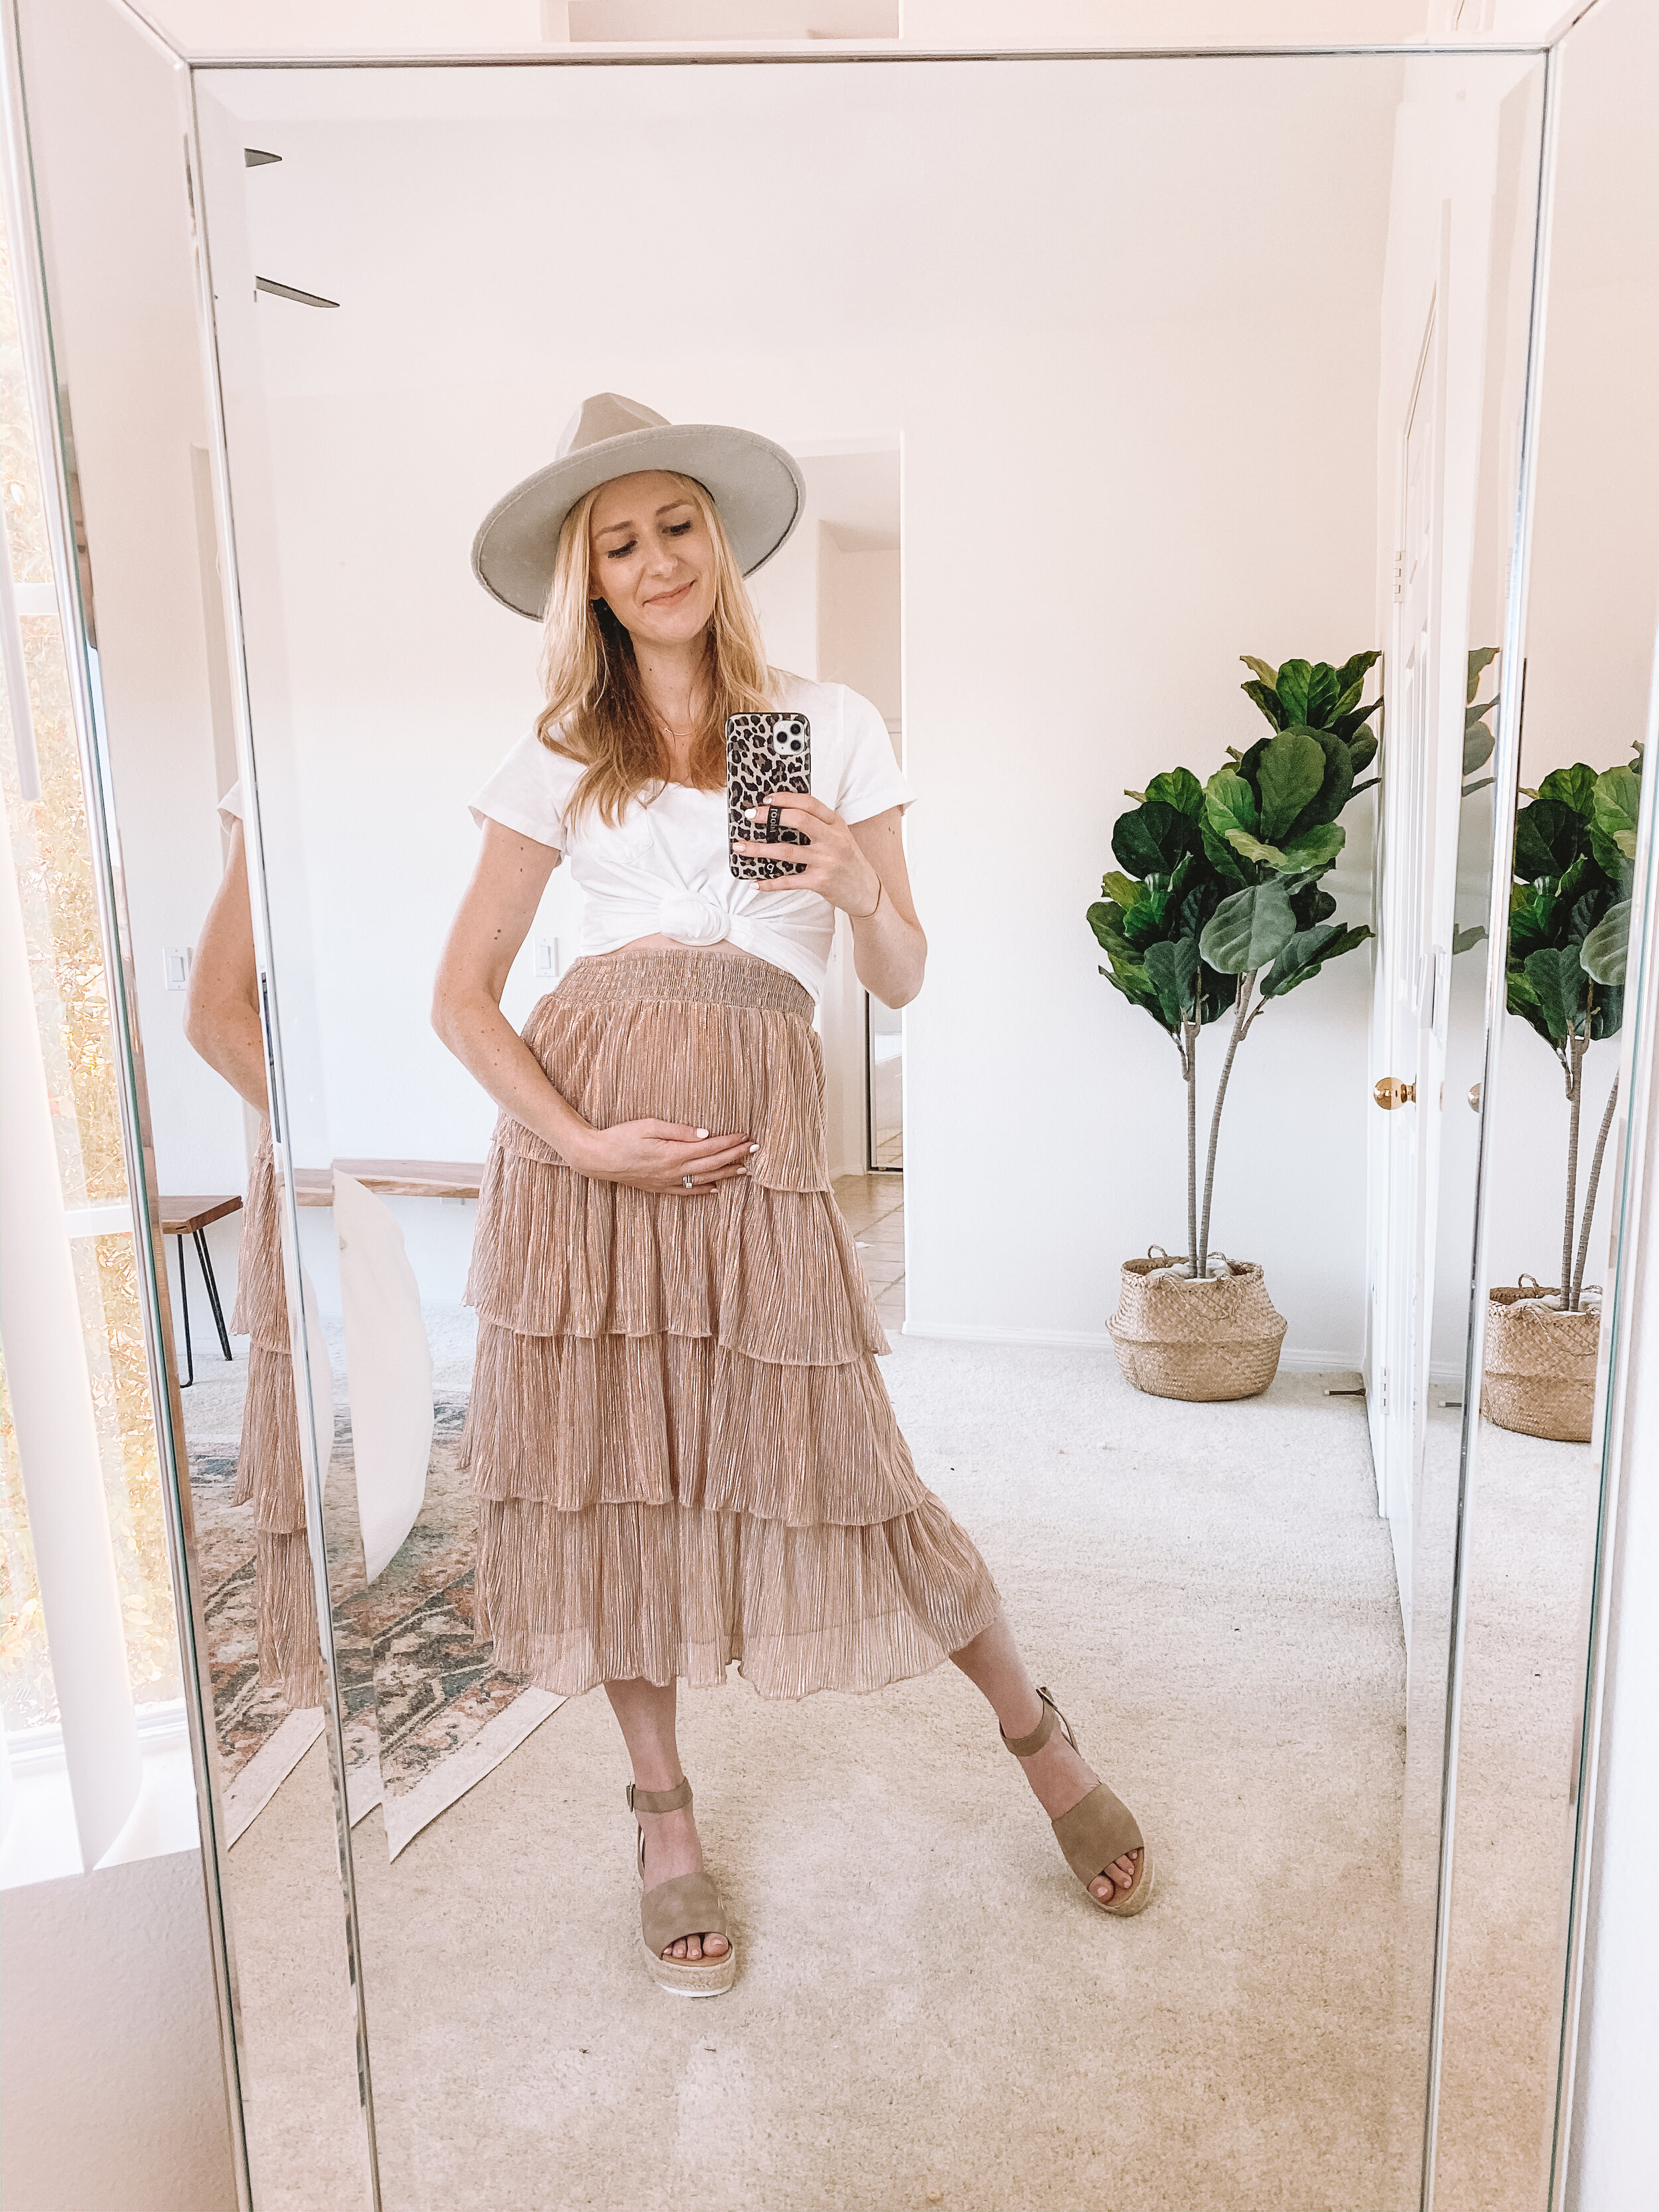 Comfy Pregnancy Summer Outfit - Hey Pretty Thing